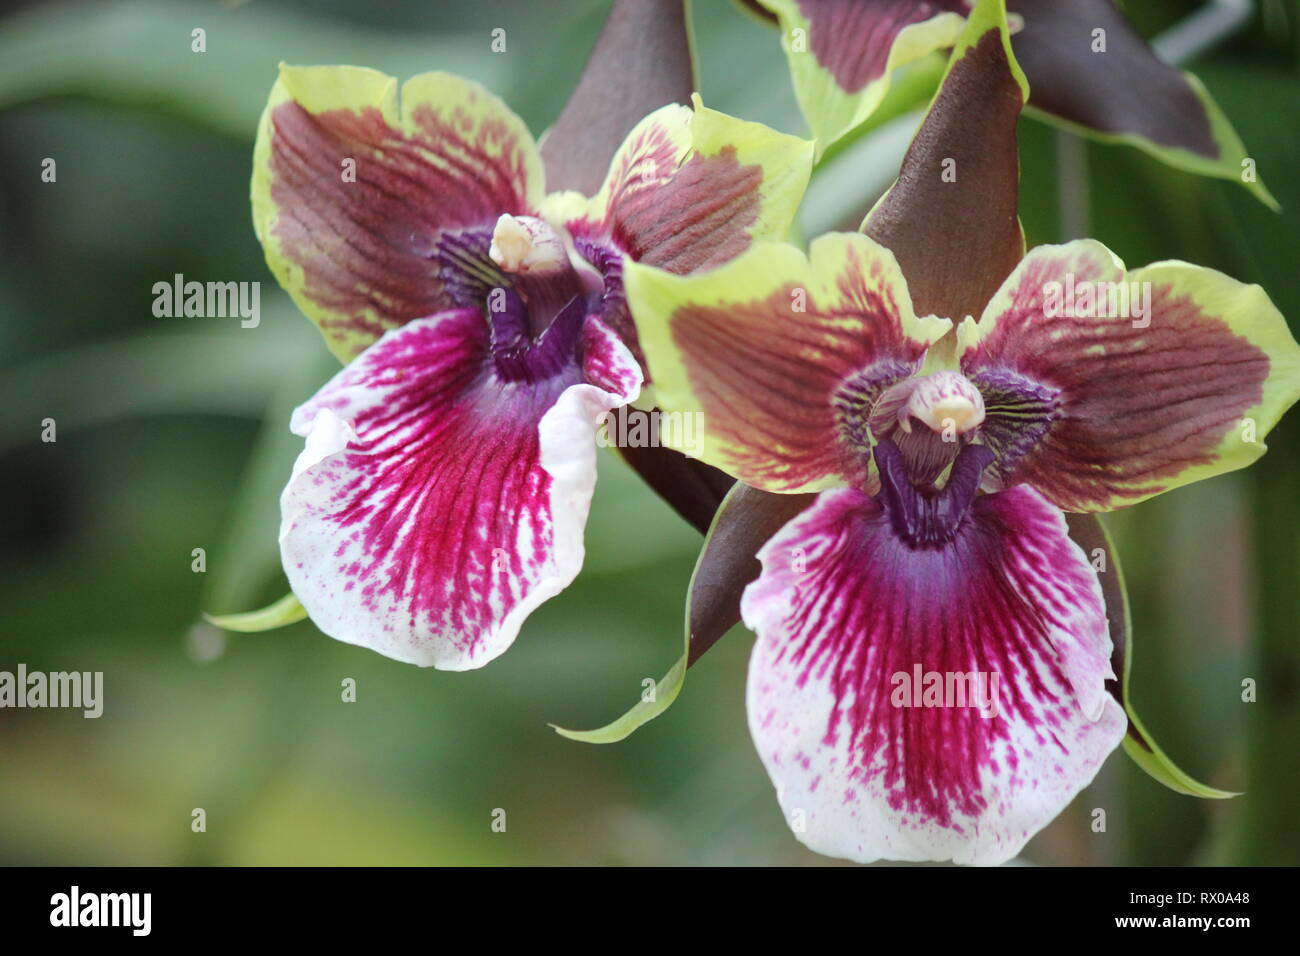 Fiery purple and green Oncostele orchid flower. Stock Photo